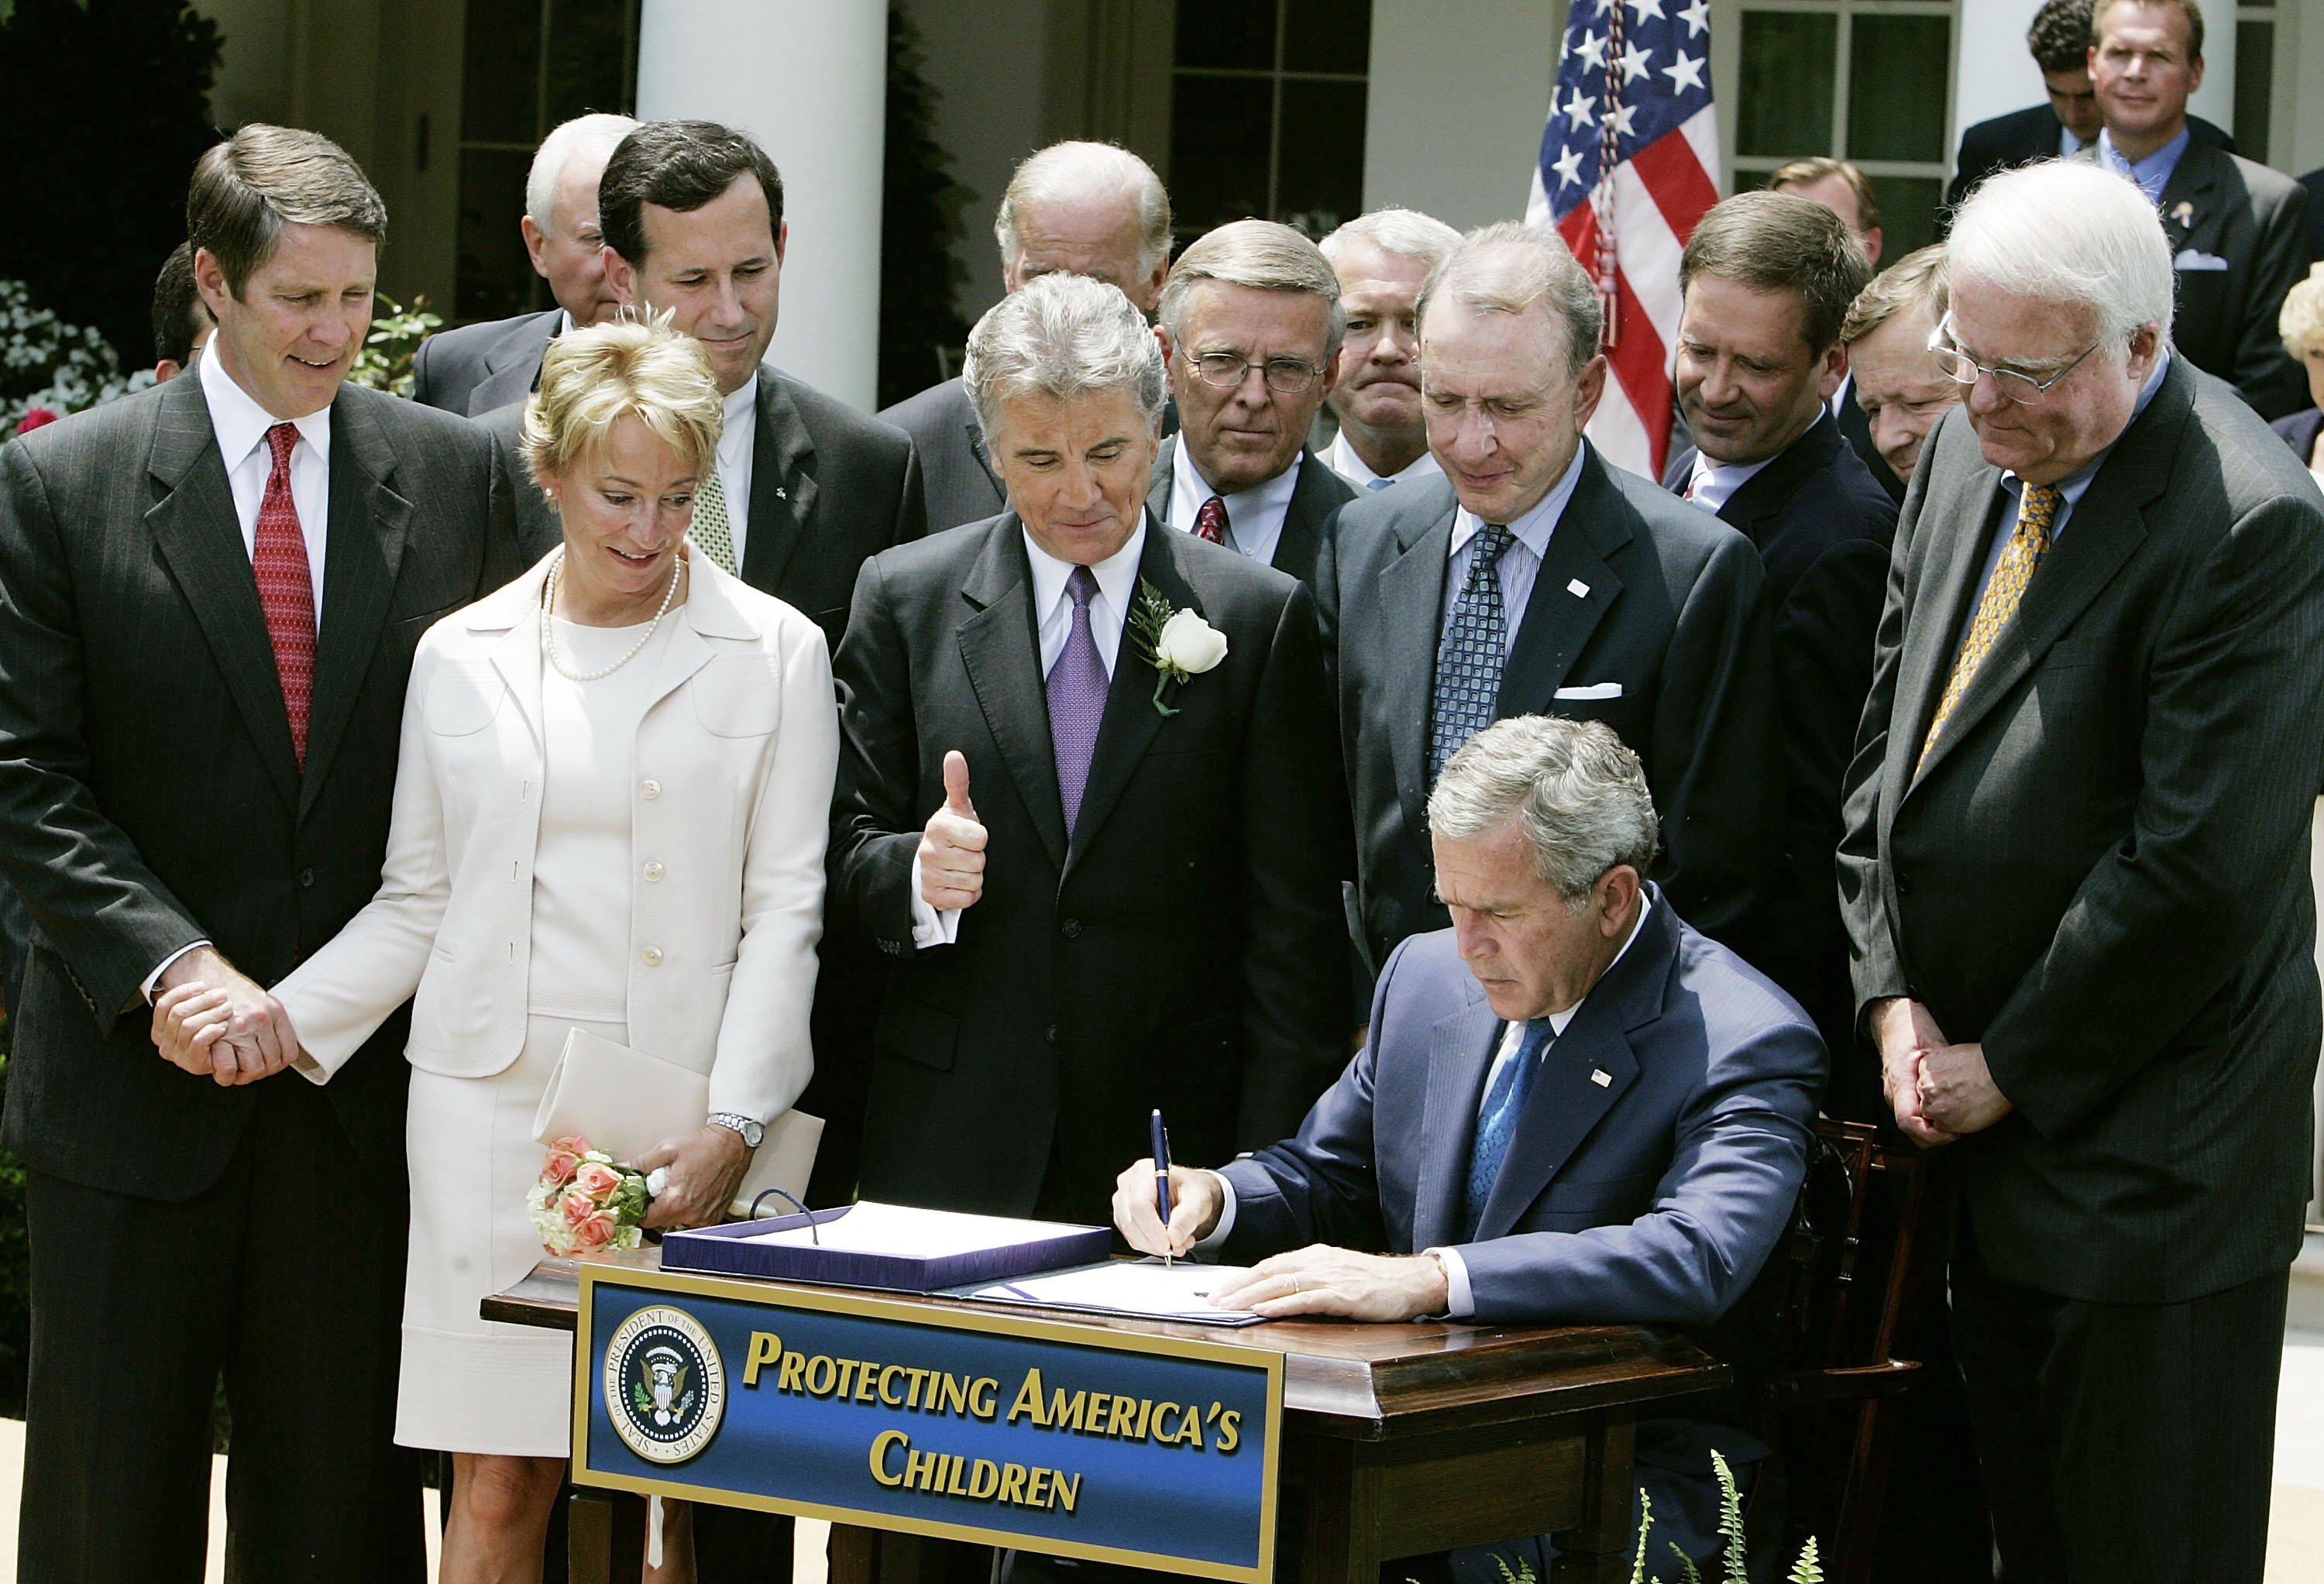 U.S. President George W. Bush signs the H.R. 4472, the Adam Walsh Child Protection and Safety Act of 2006, while John Walsh gives a thumbs up and his wife Reve Walsh (2nd-L) holds hands with Senate Majority Leader Bill Frist (L) and members of Congress stand nearby in the Rose Garden, at the White House, July 27, 2006, in Washington, DC. | Source: Getty Images